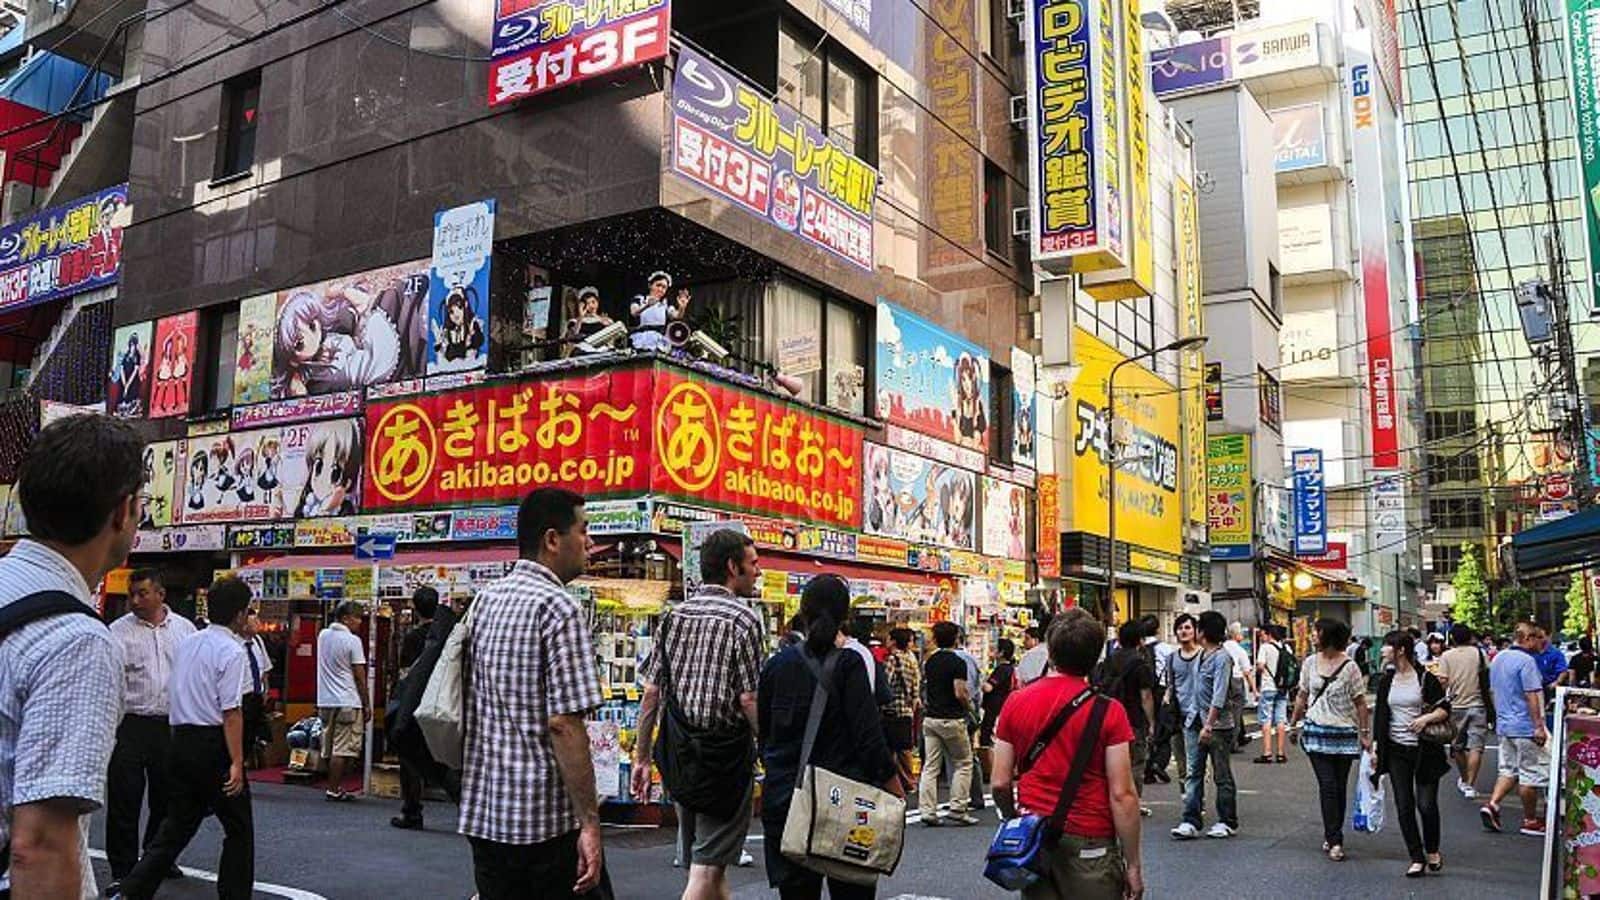 Take a tour of Tokyo's high-tech wonderland with this guide